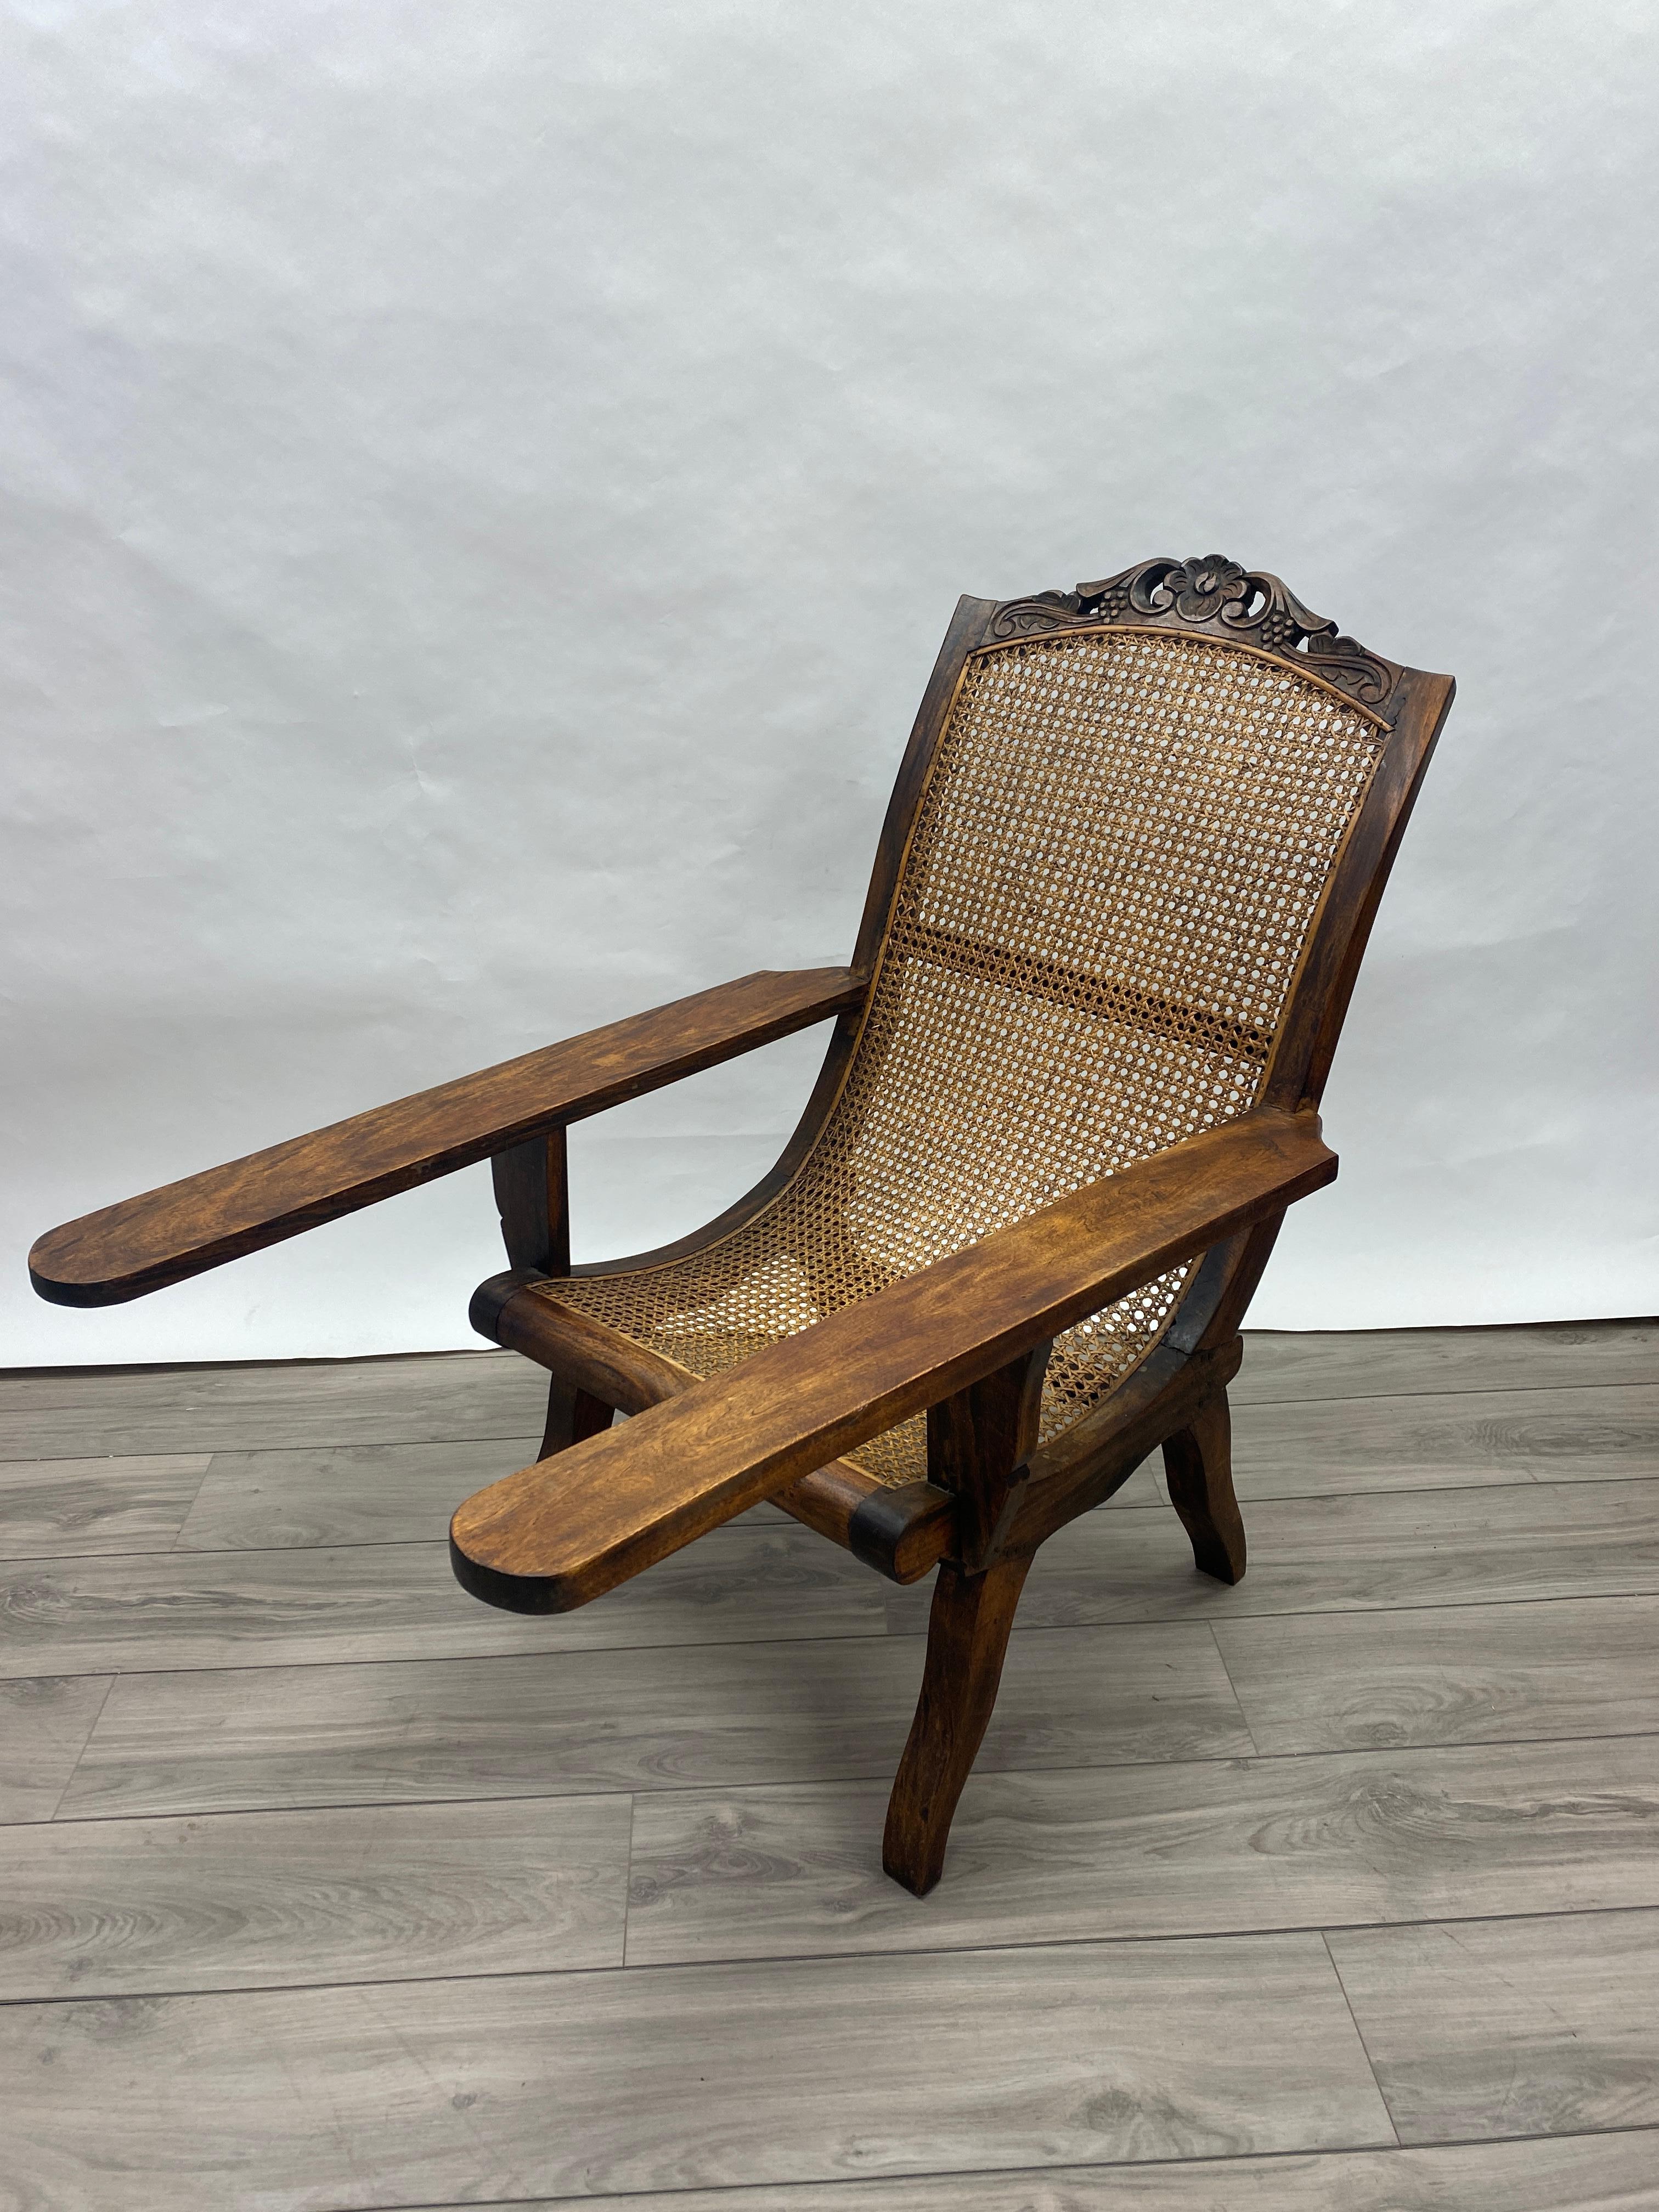 A sturdy and well made English colonial teak planation chair with original cain and stationary arms. Very nice example of a late 19th century planation chair. Slight warping in the back but very solid and does not rock.